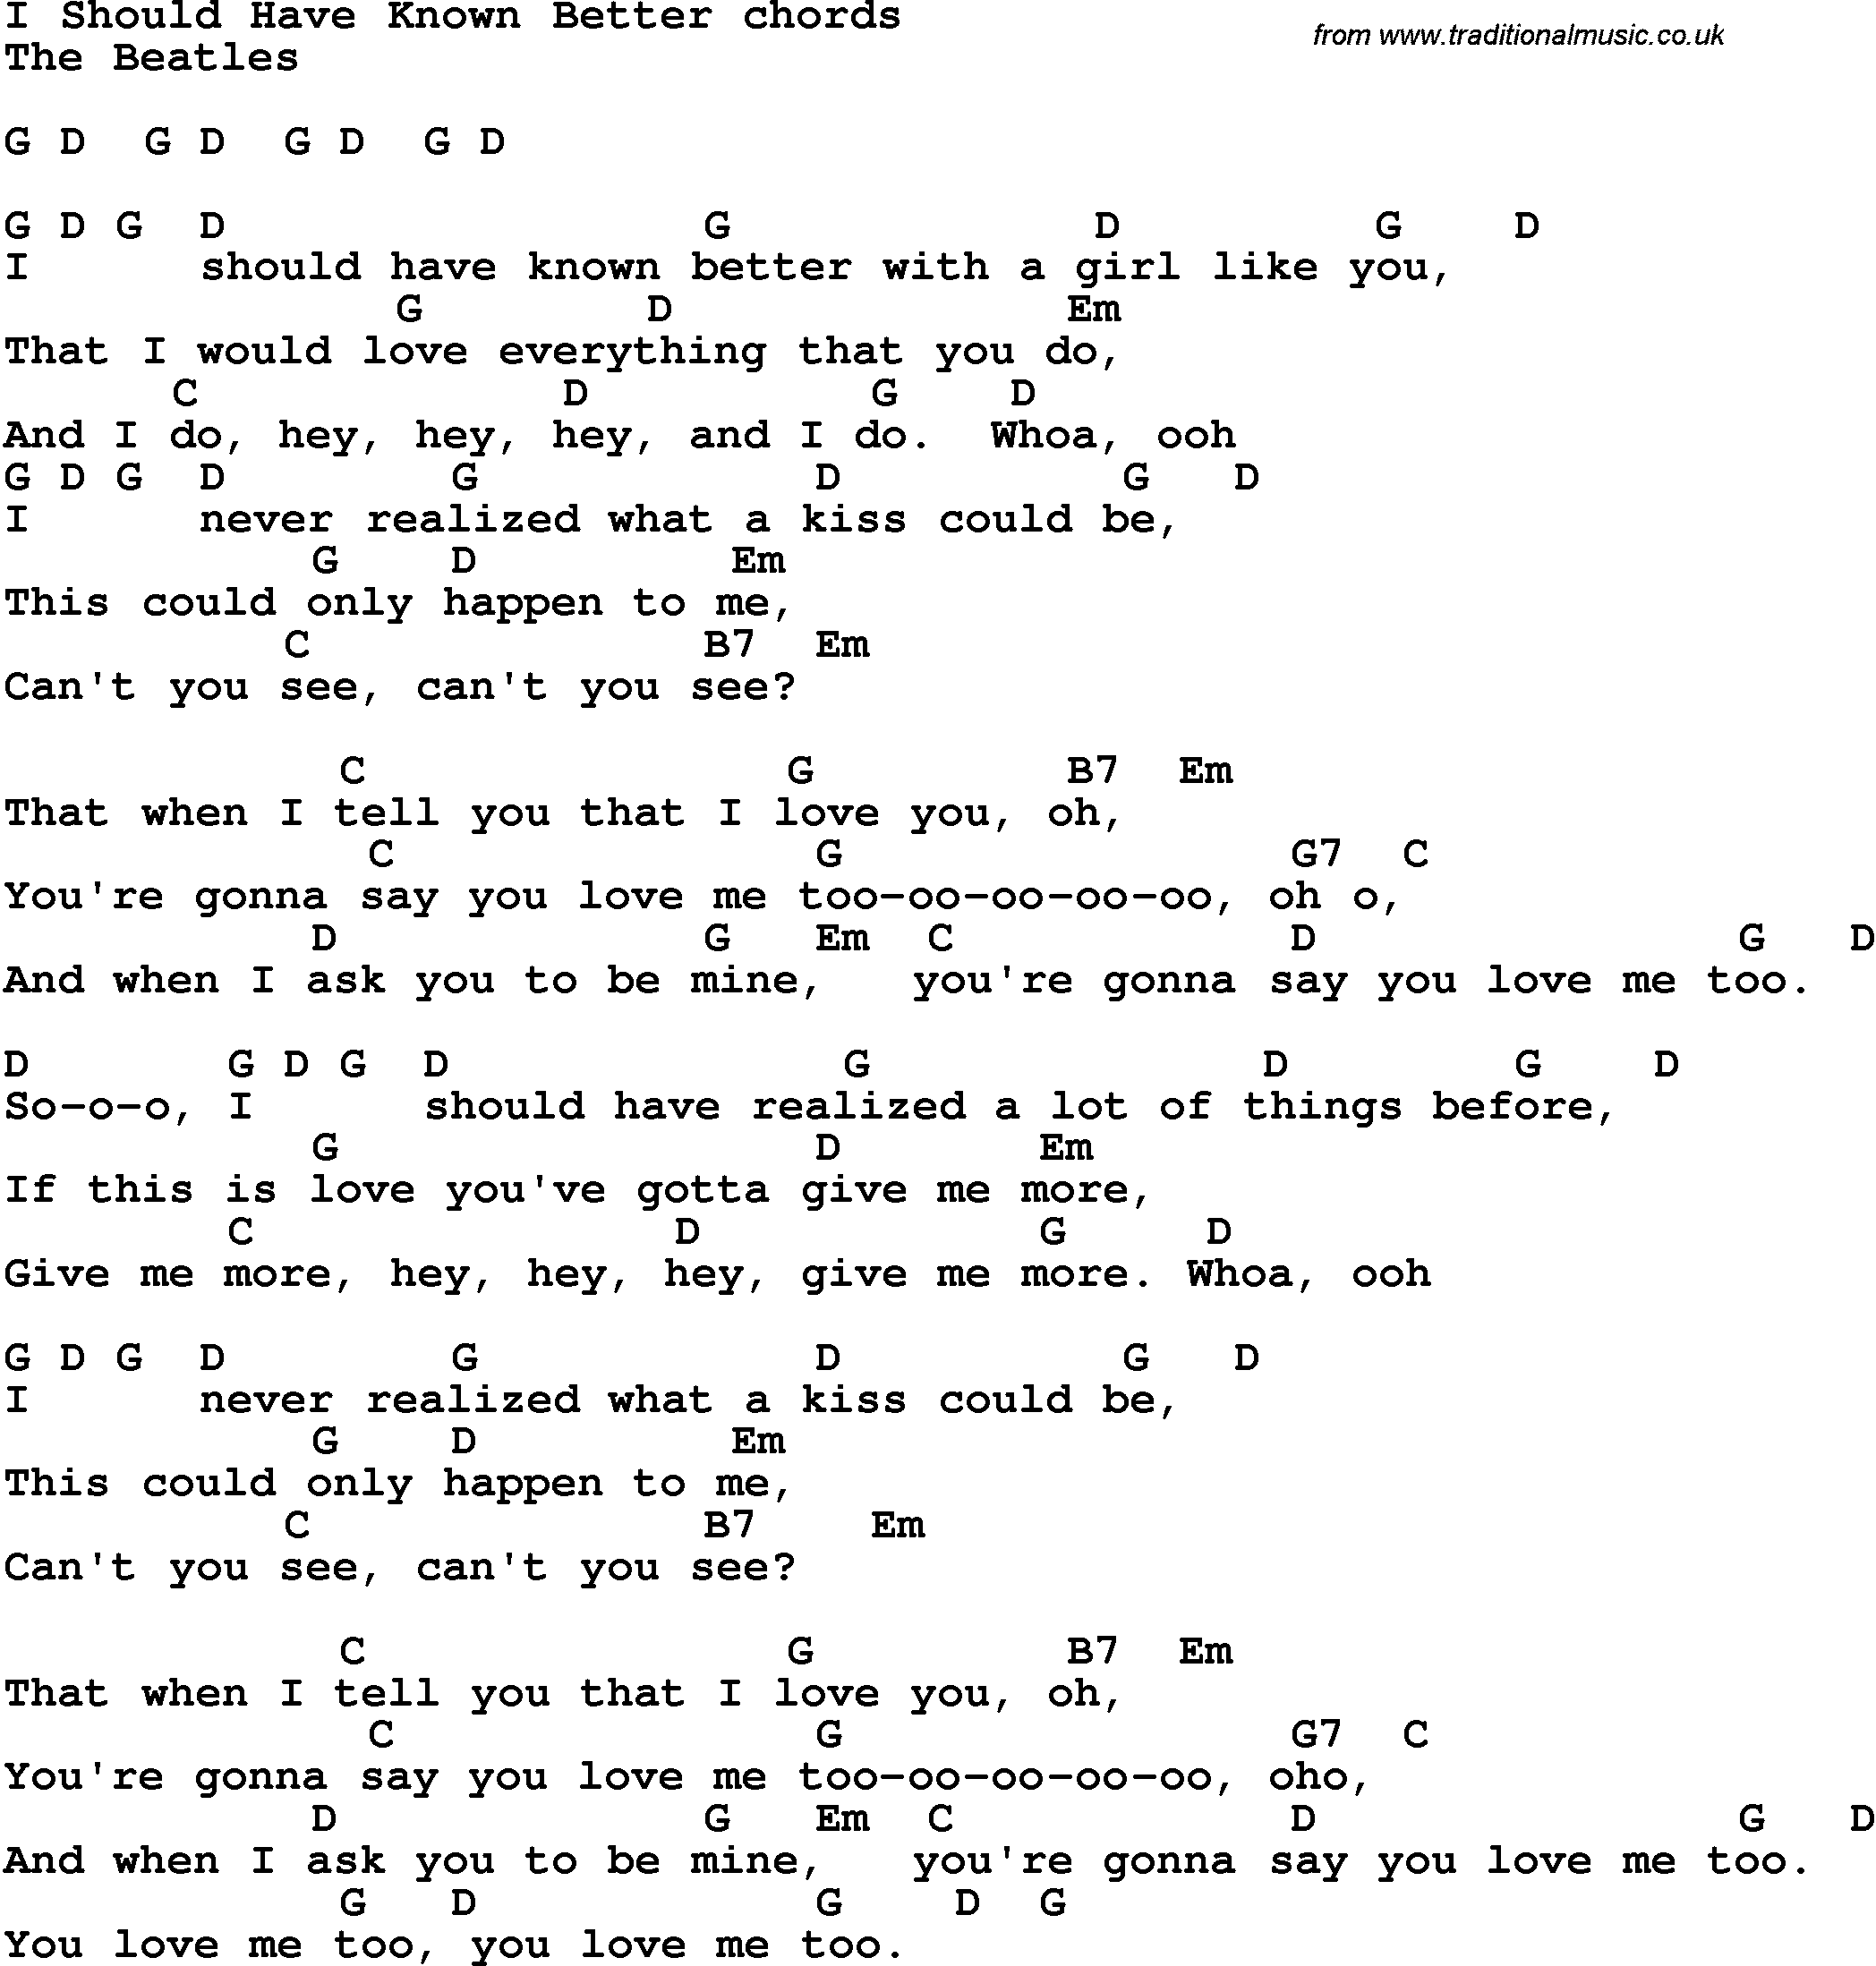 Song Lyrics with guitar chords for I Should Have Known Better